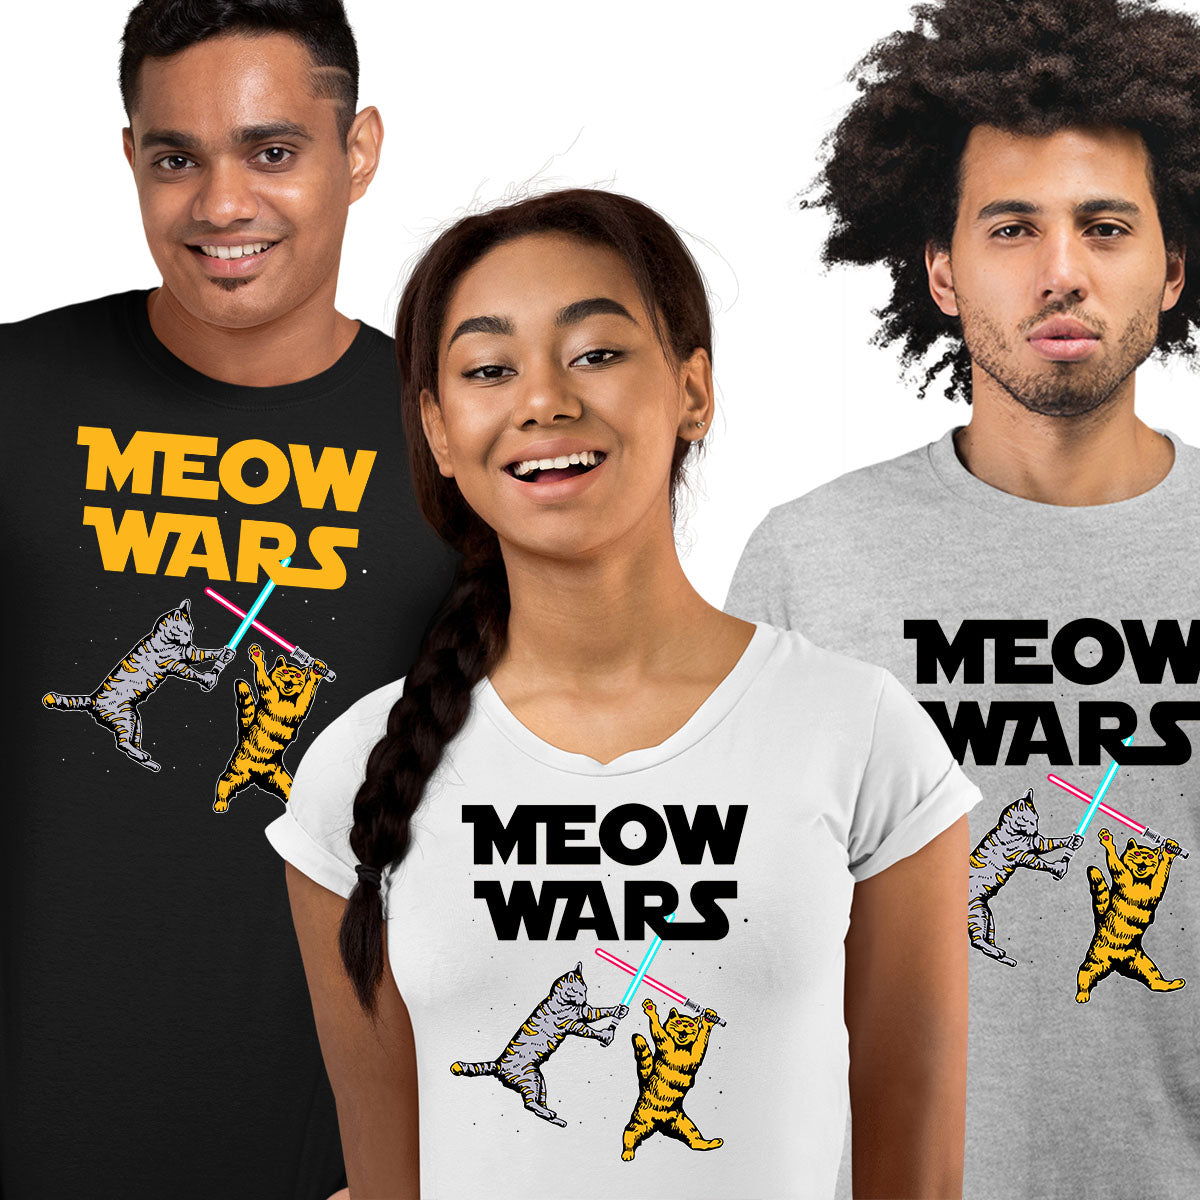 Meow Wars - Funny Cat Lover Gift Adult Unisex T-Shirt - Kuzi Tees